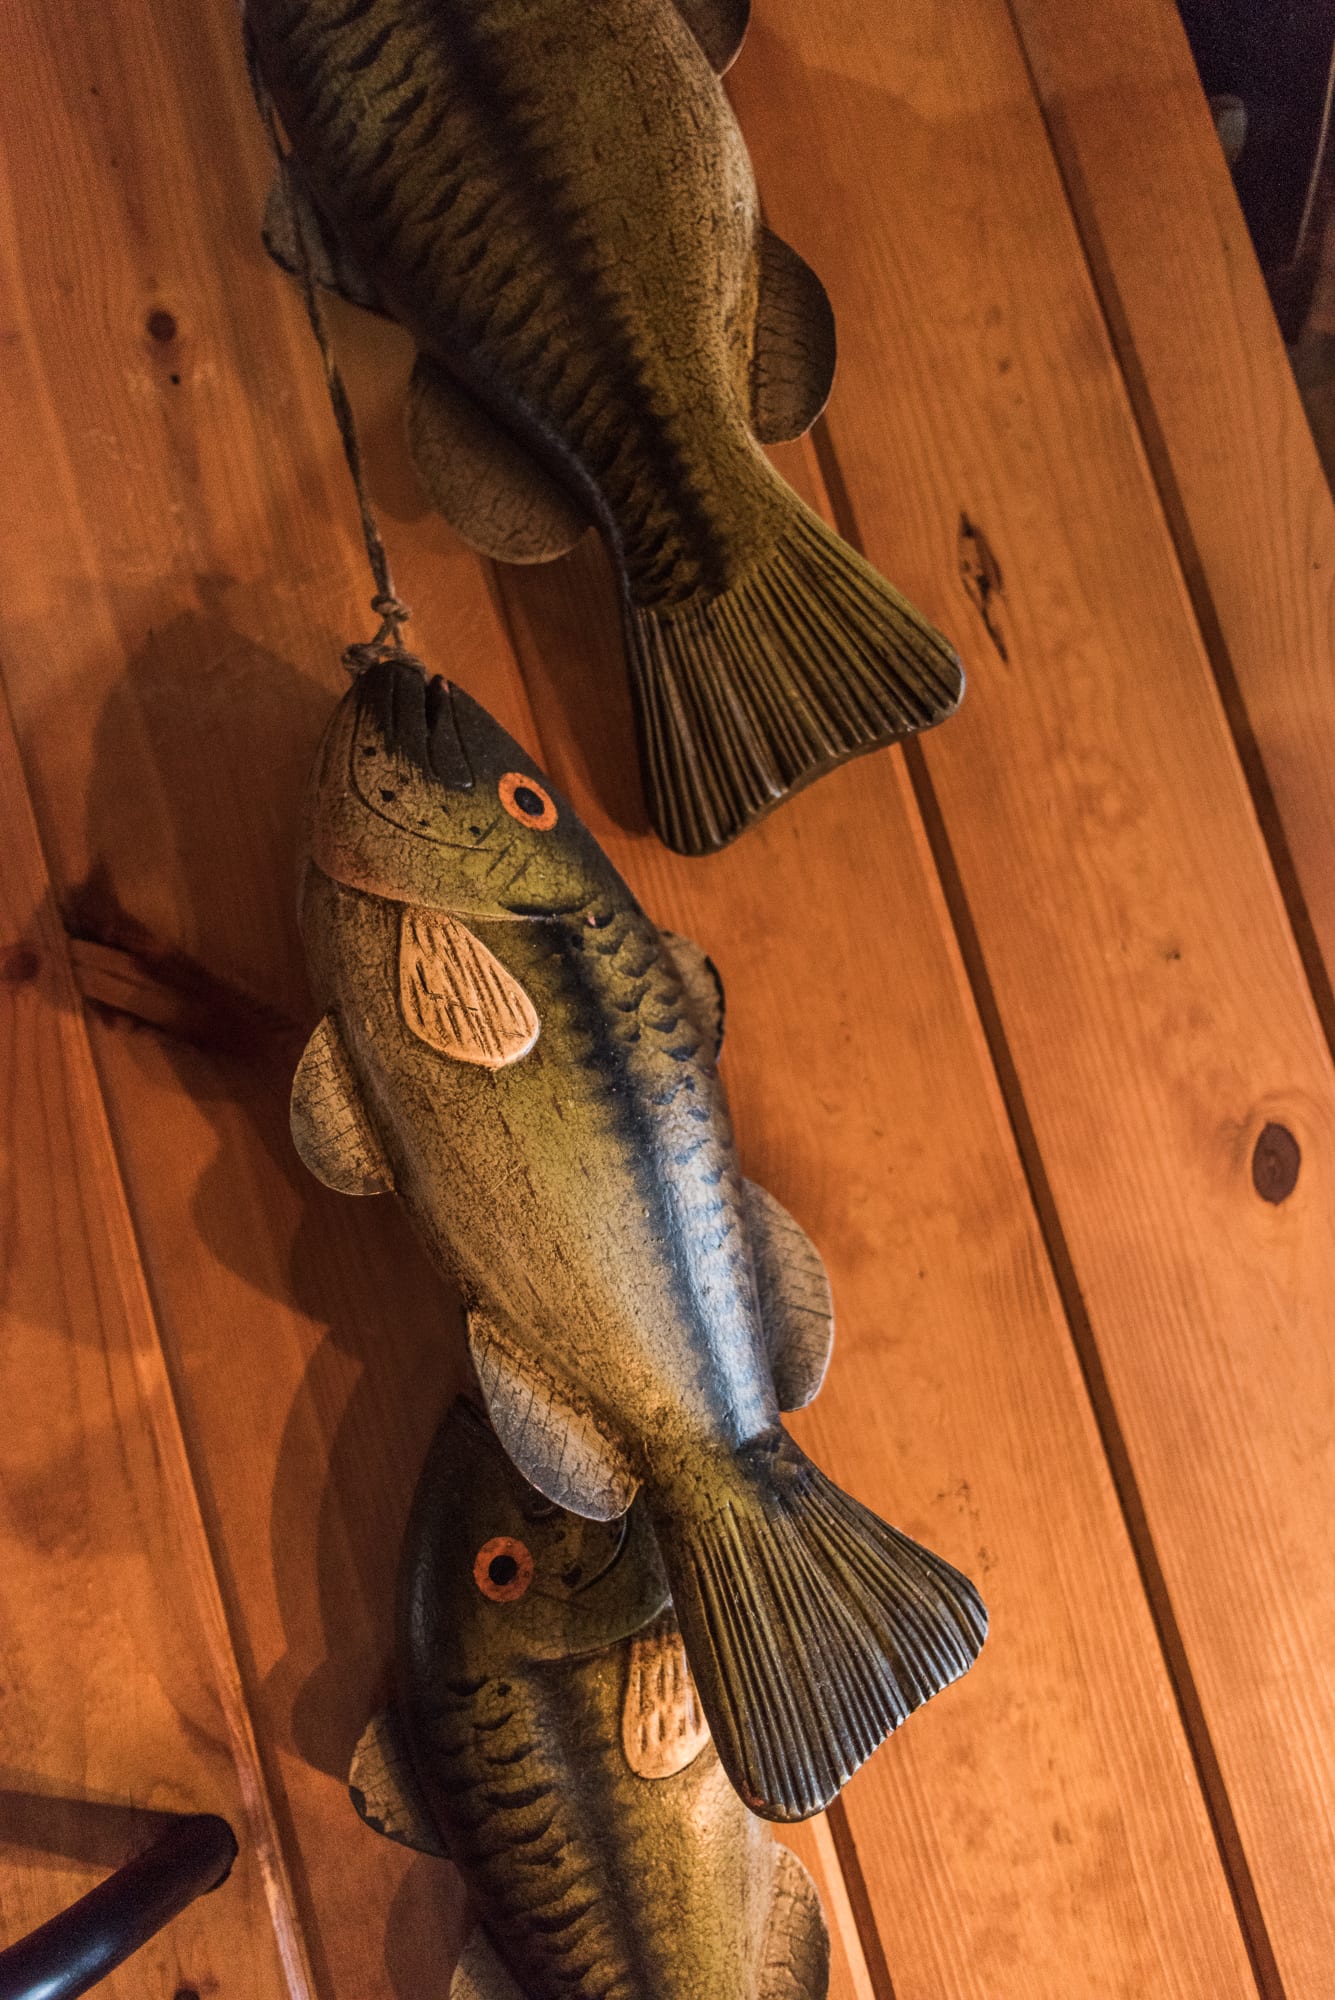 Lakeview cabin mounted fish on wall.